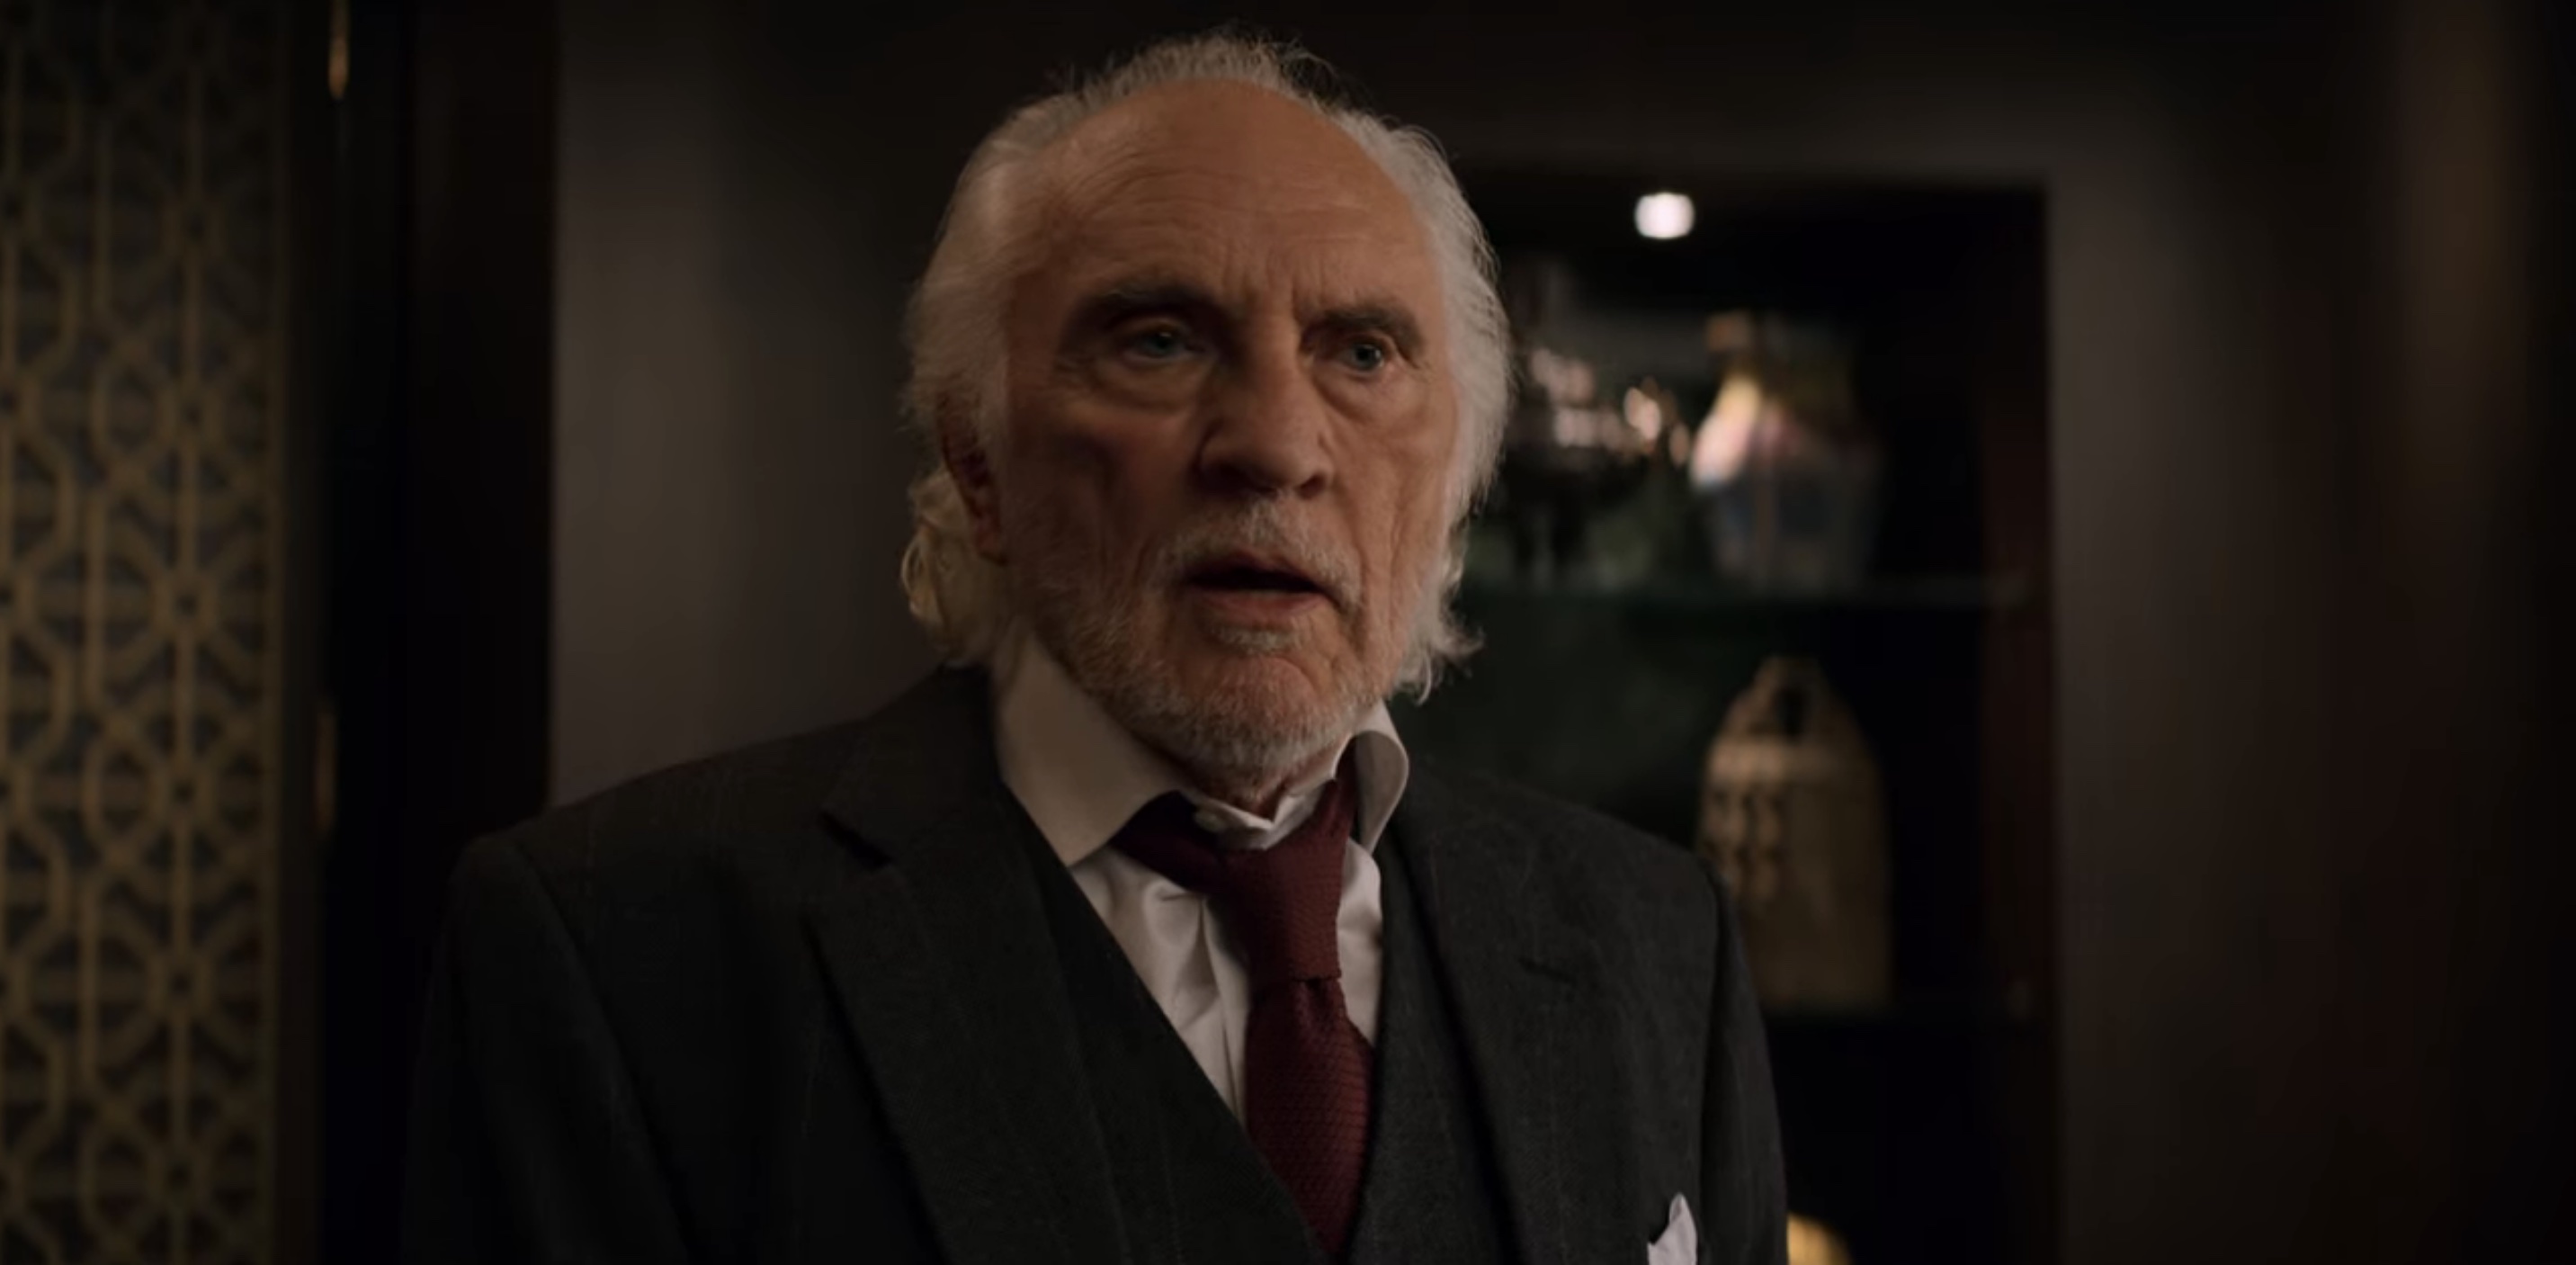 Murder Mystery Cast on Netflix - Terence Stamp as Malcolm Quince